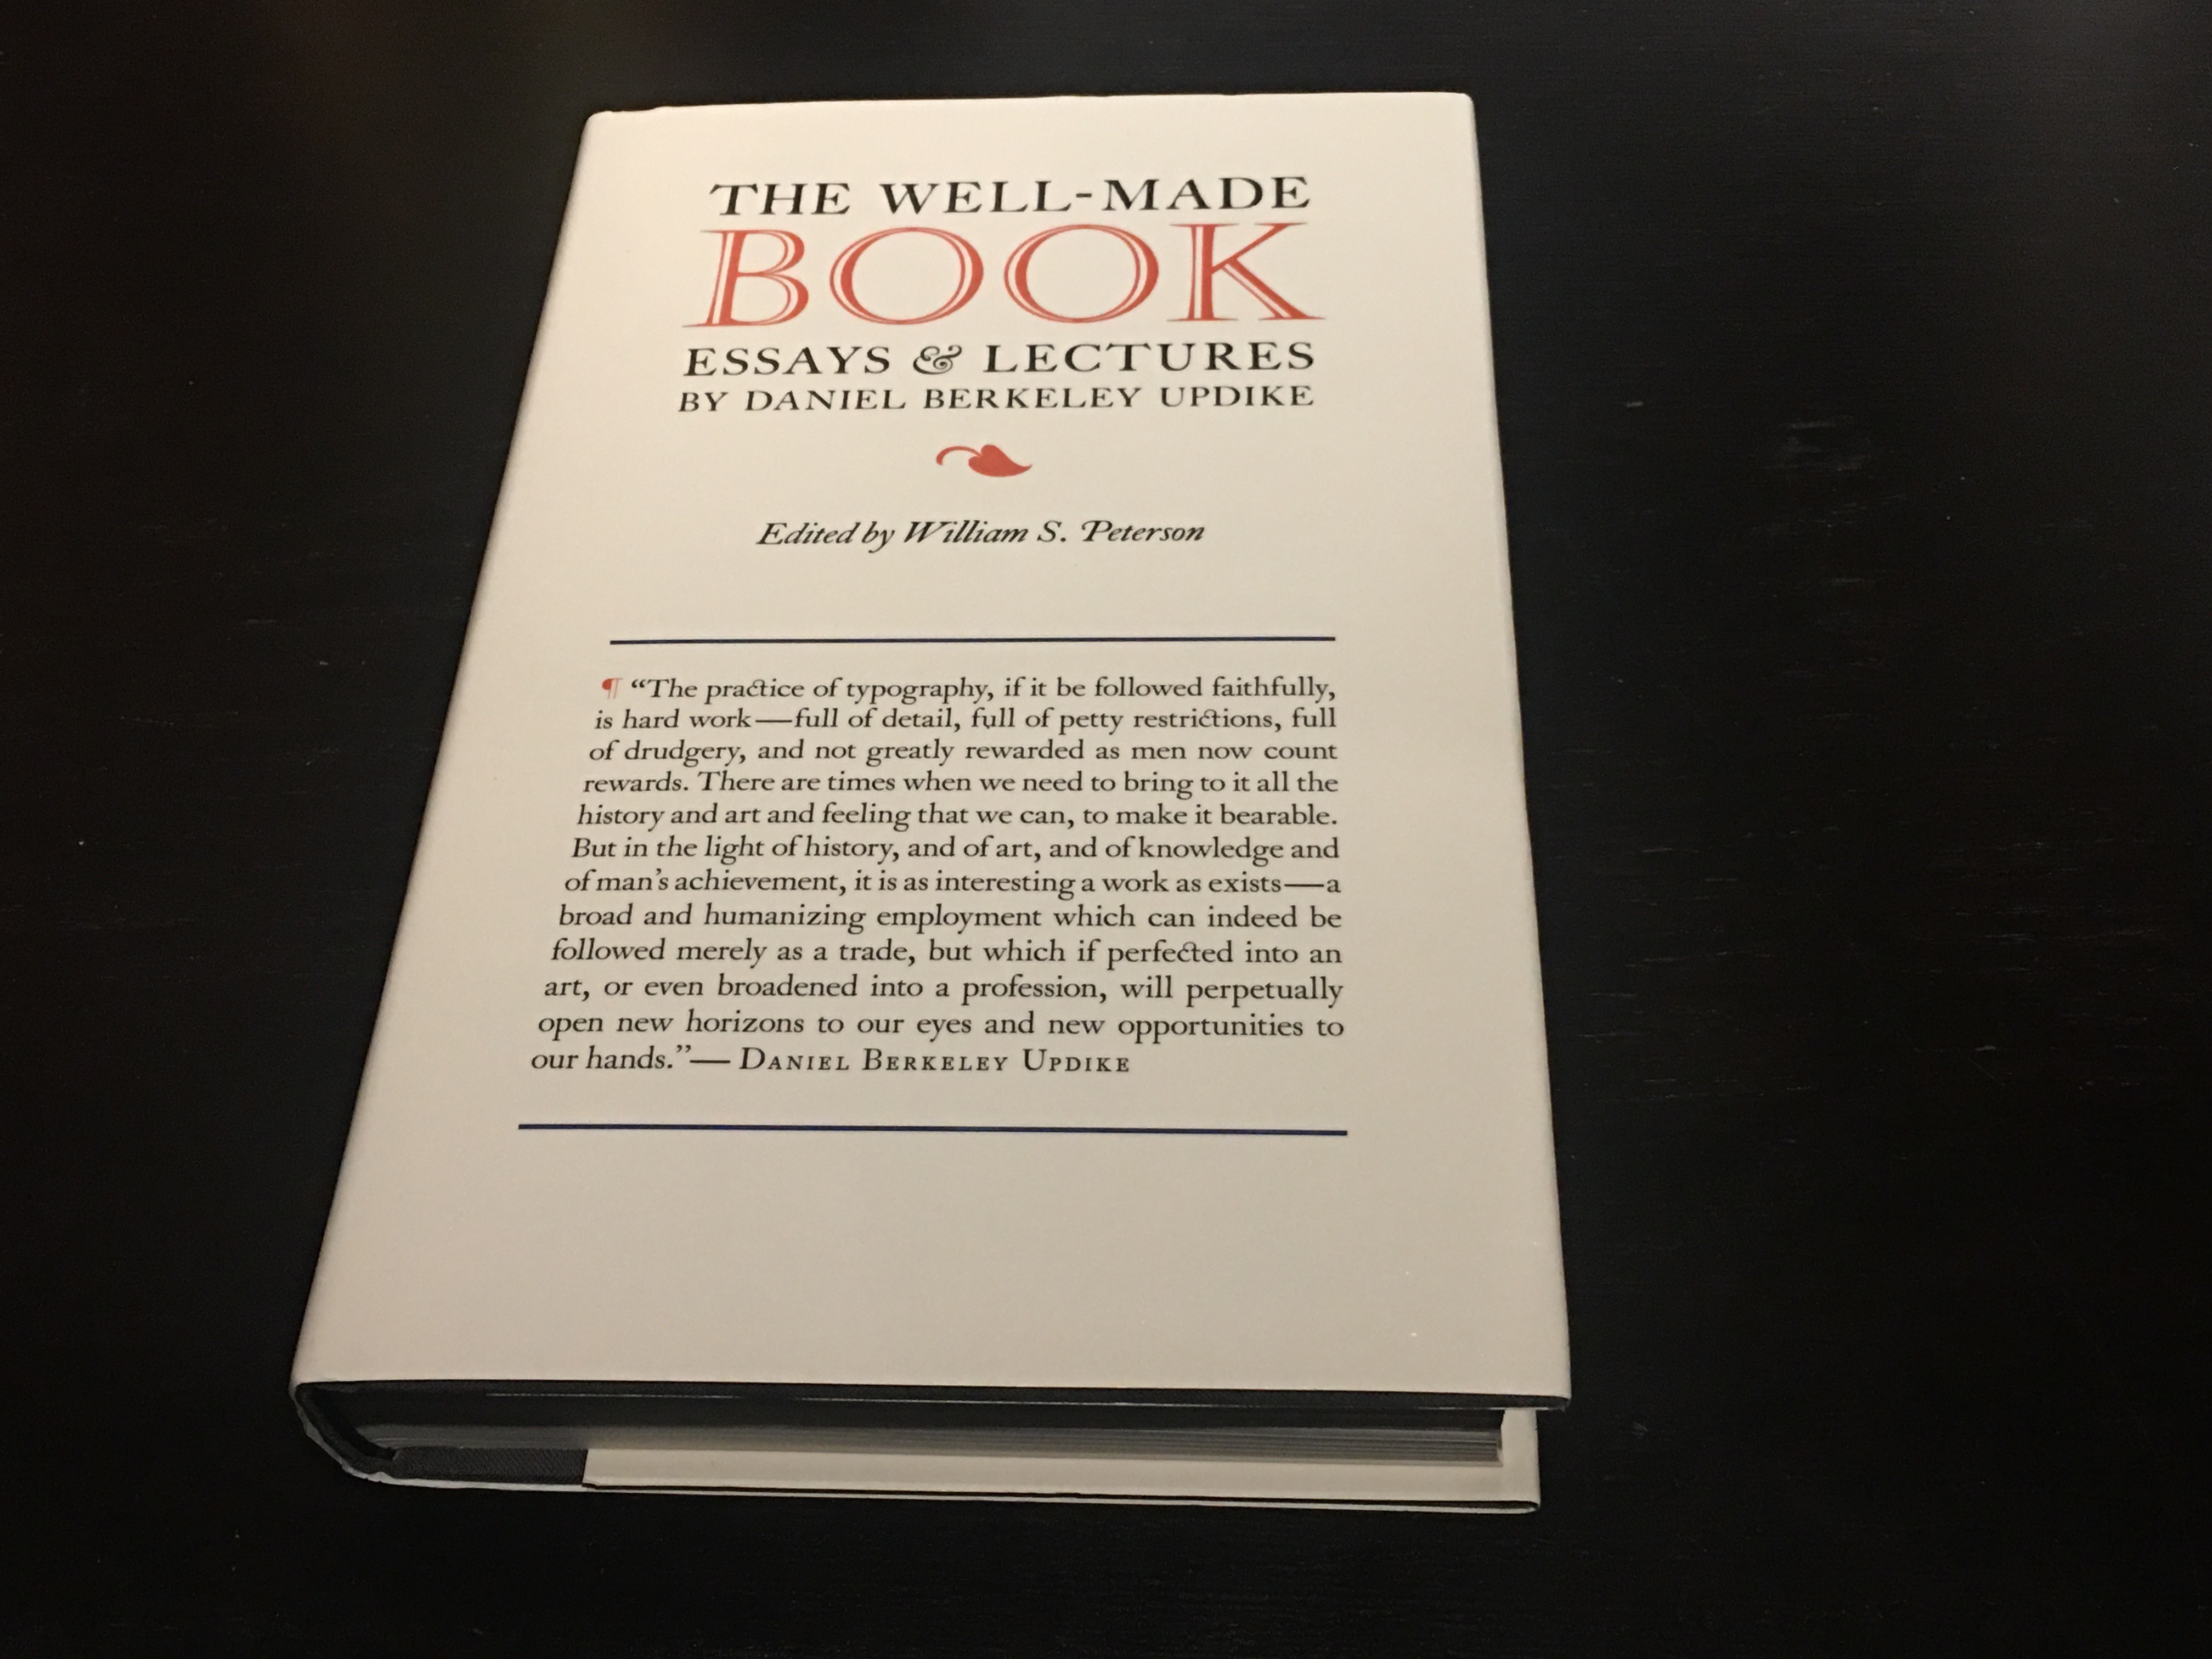 The well-made book